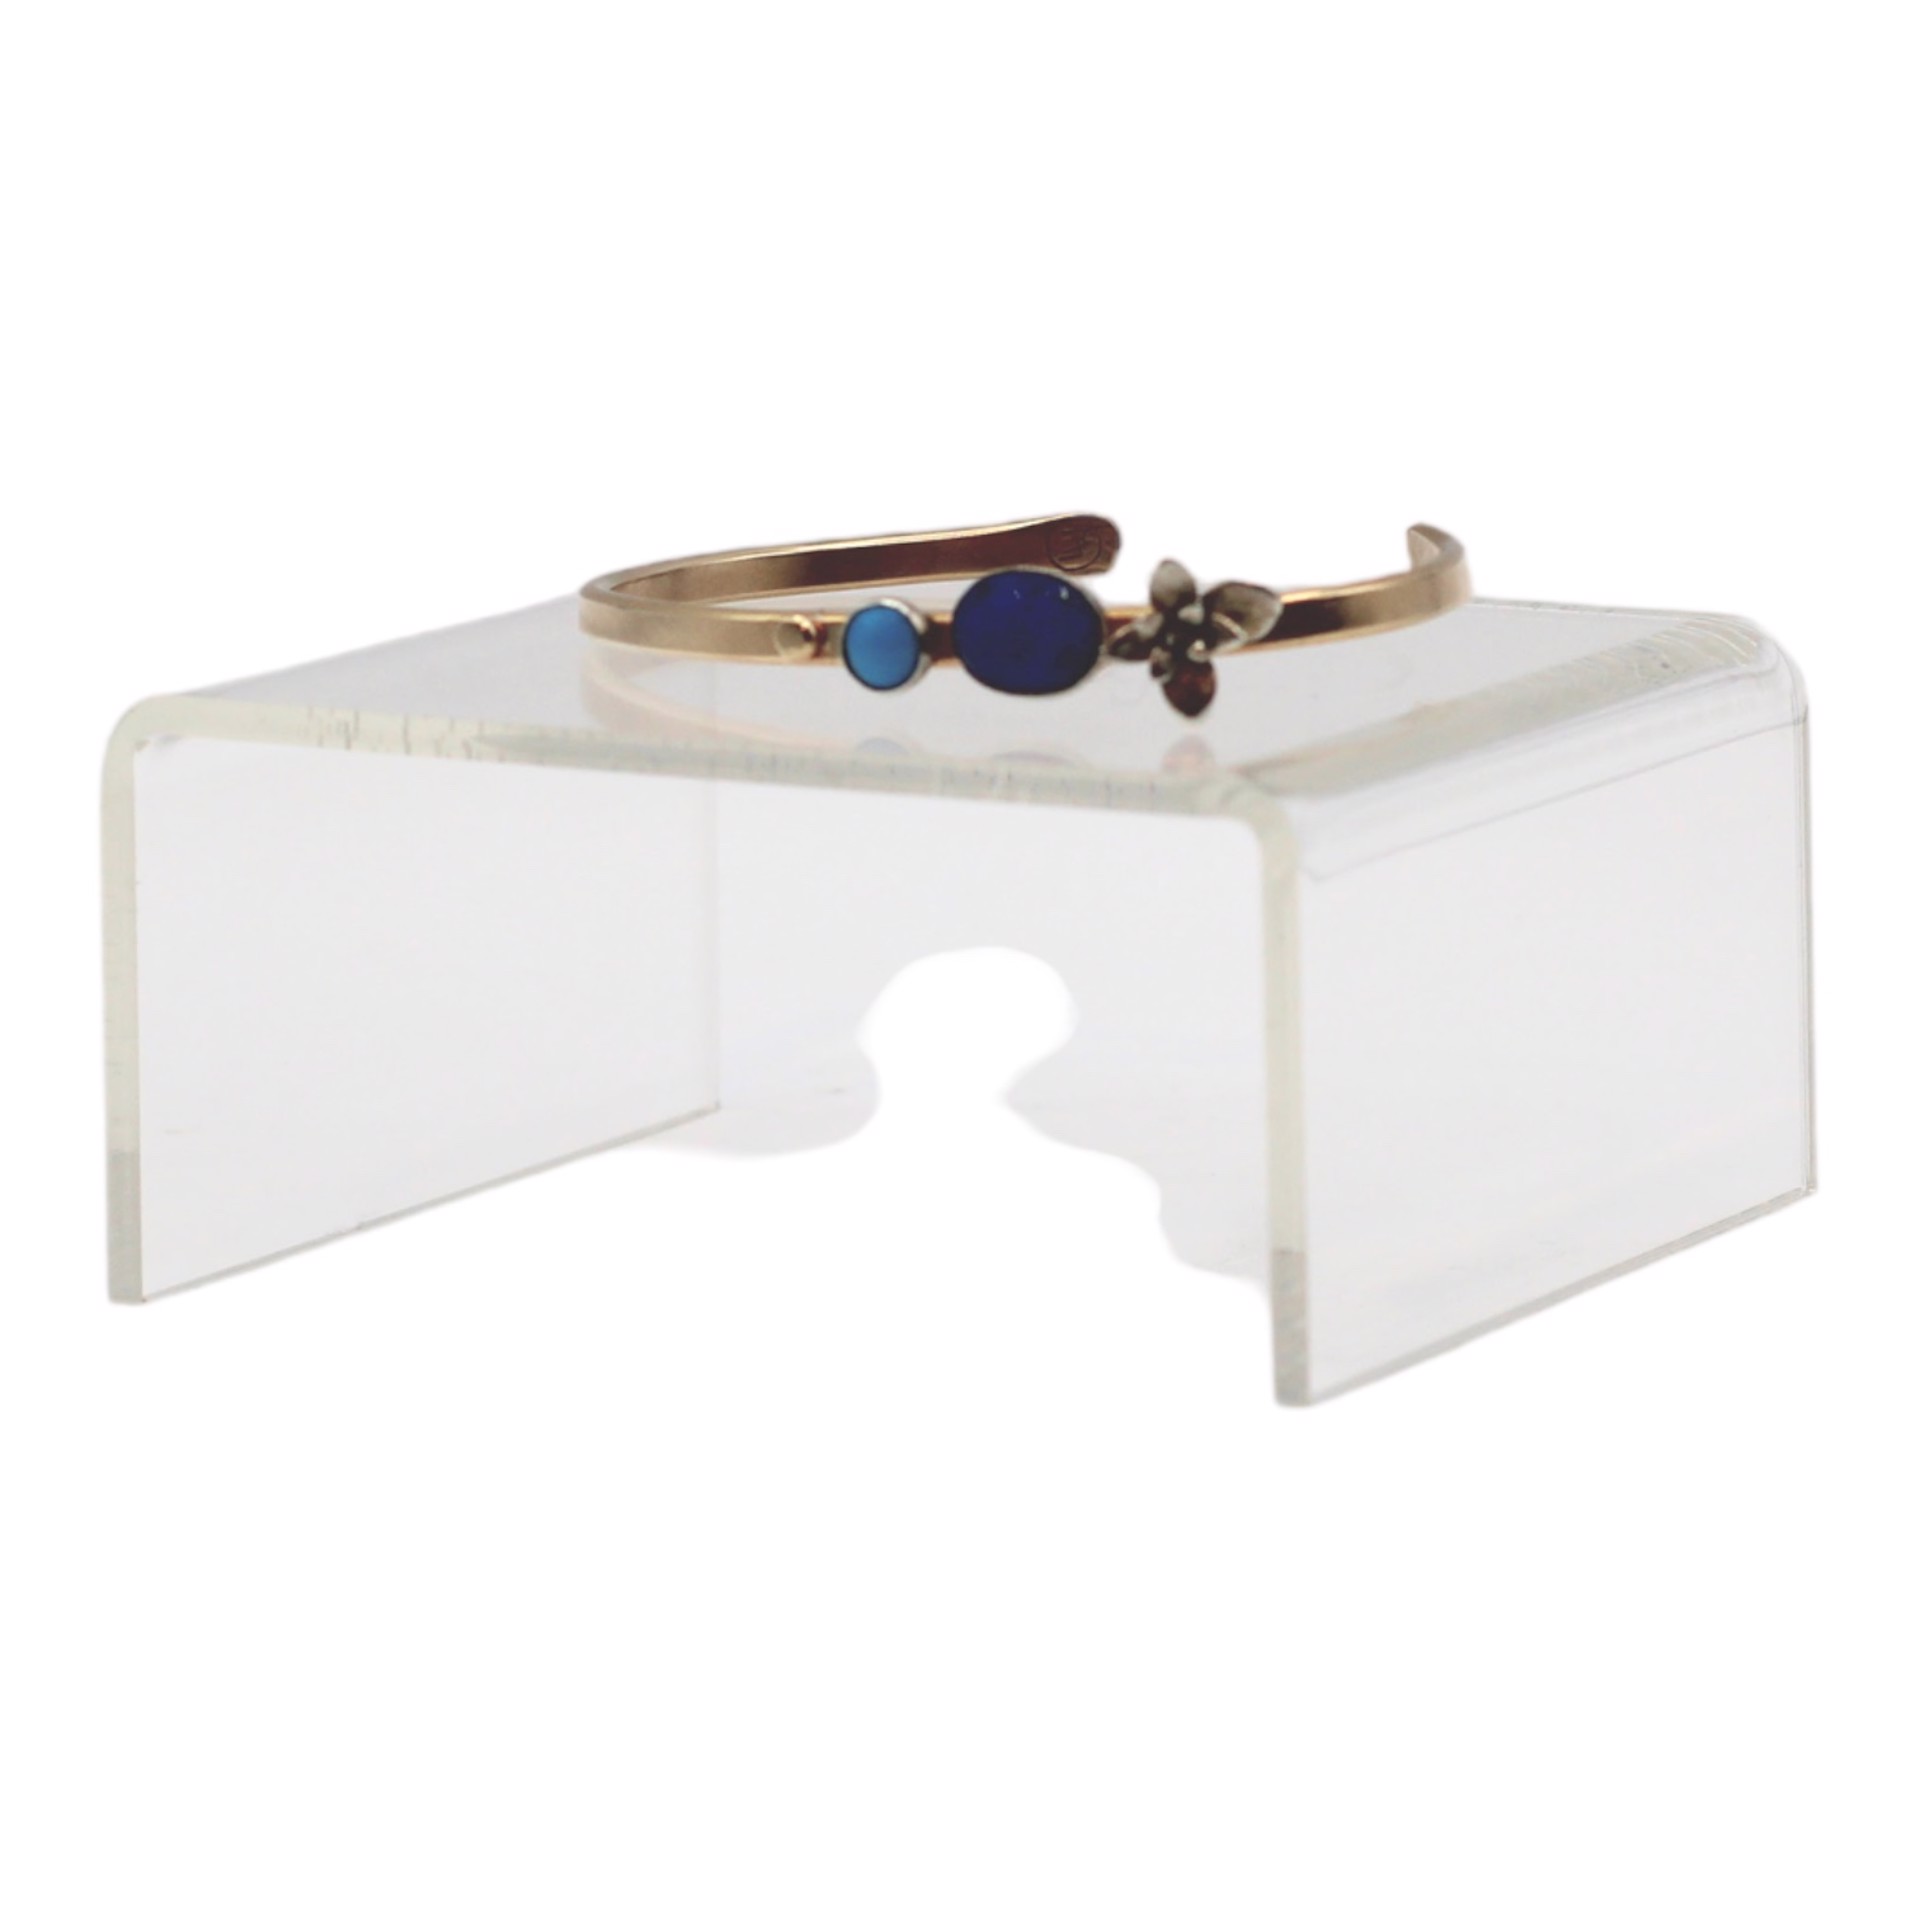 14k Gold Cufflette with Silver Cast Succulent ,Lapis, Sonoran Rose Turquoise by Emily Dubrawski